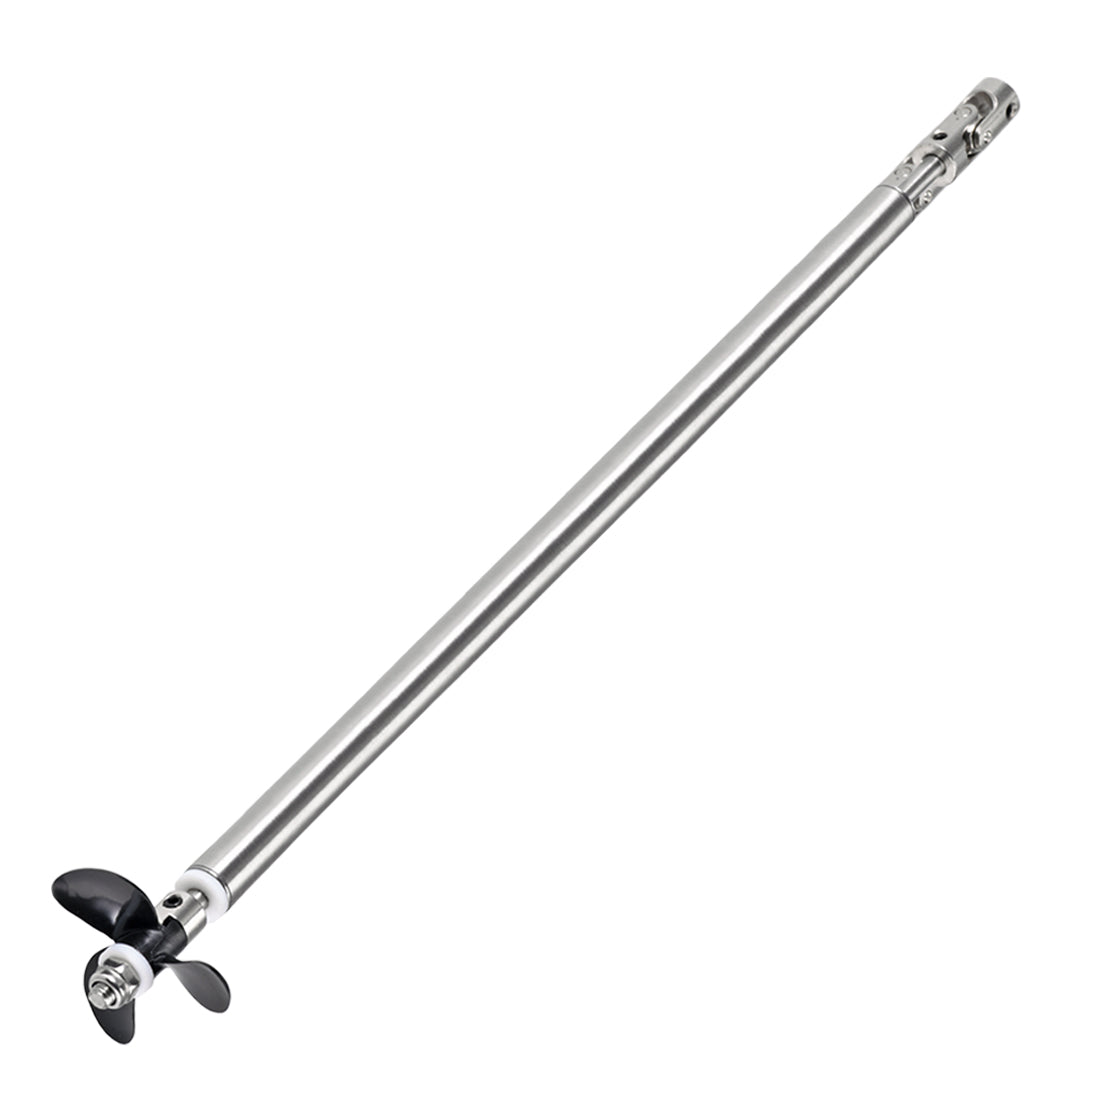 uxcell Uxcell 4mm Drive Shaft w Propeller and Universal Joint for RC Boat,  L250mm Shaft, L200mm Sleeve, D36mm Propeller, Fit for 5mm Motor Shaft